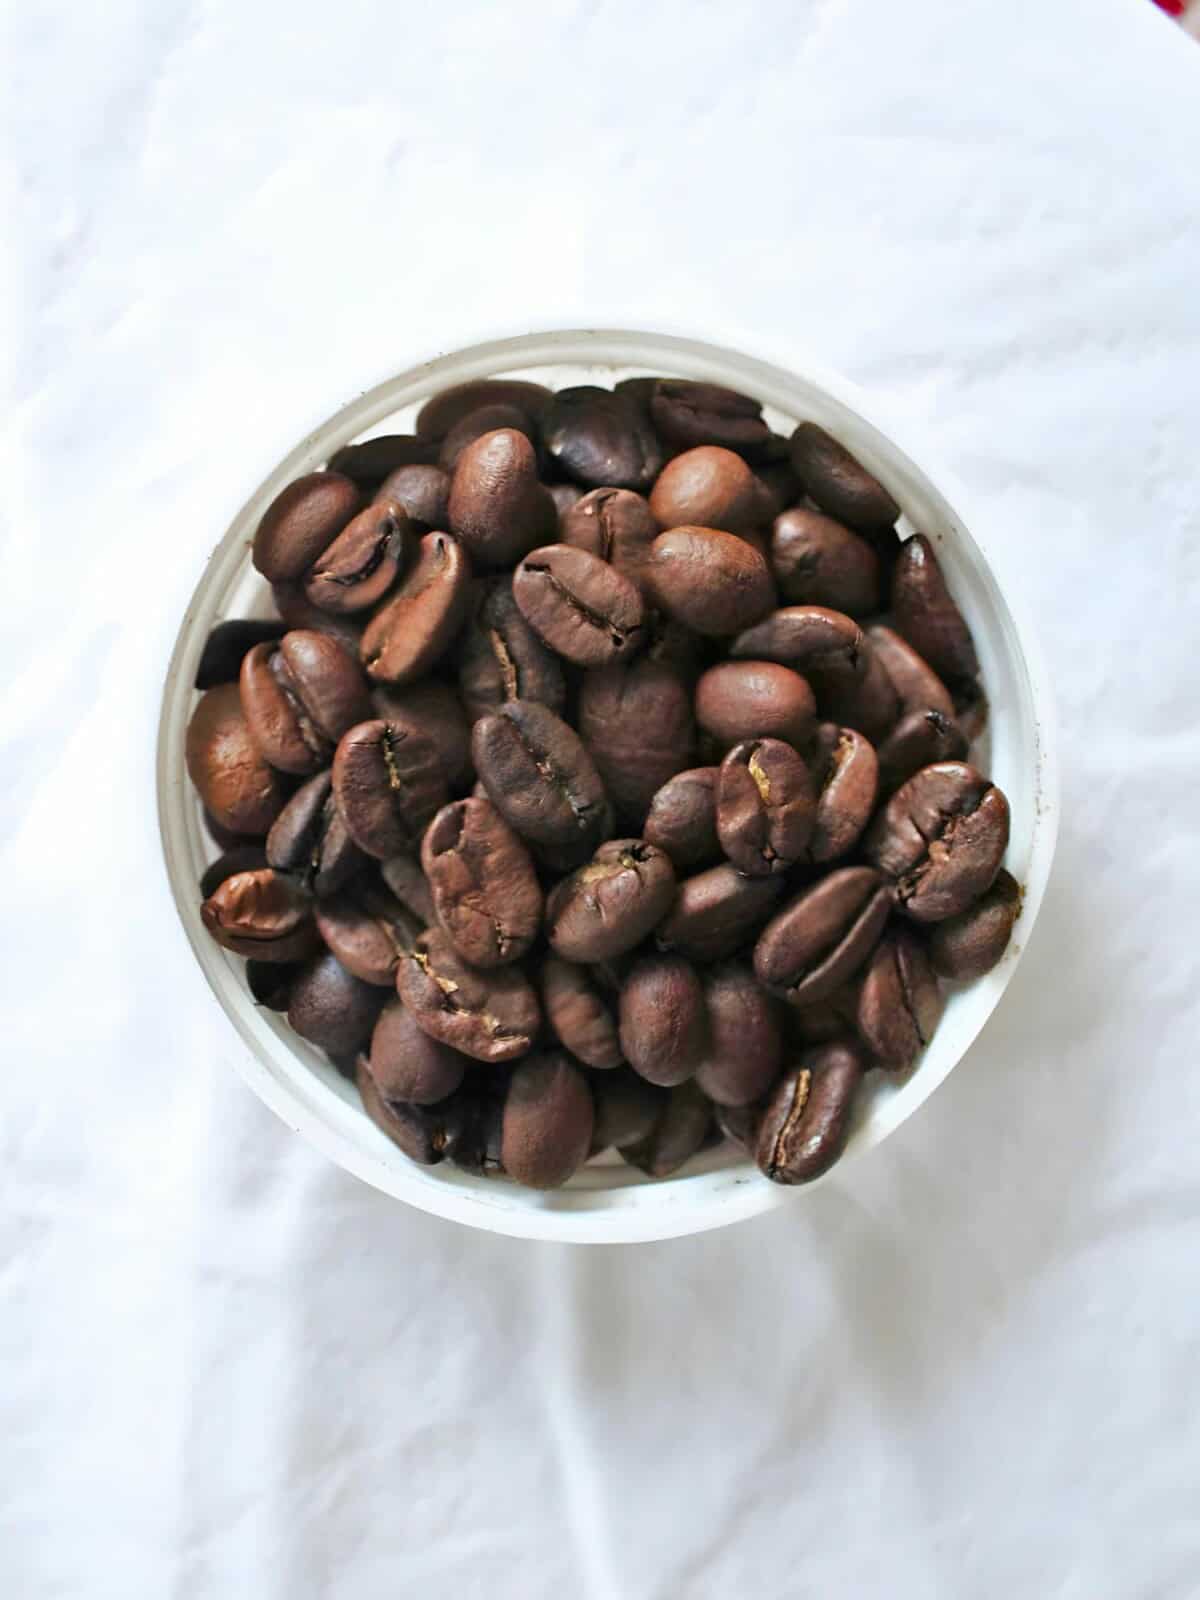 coffee beans in a bowl on a white cloth.